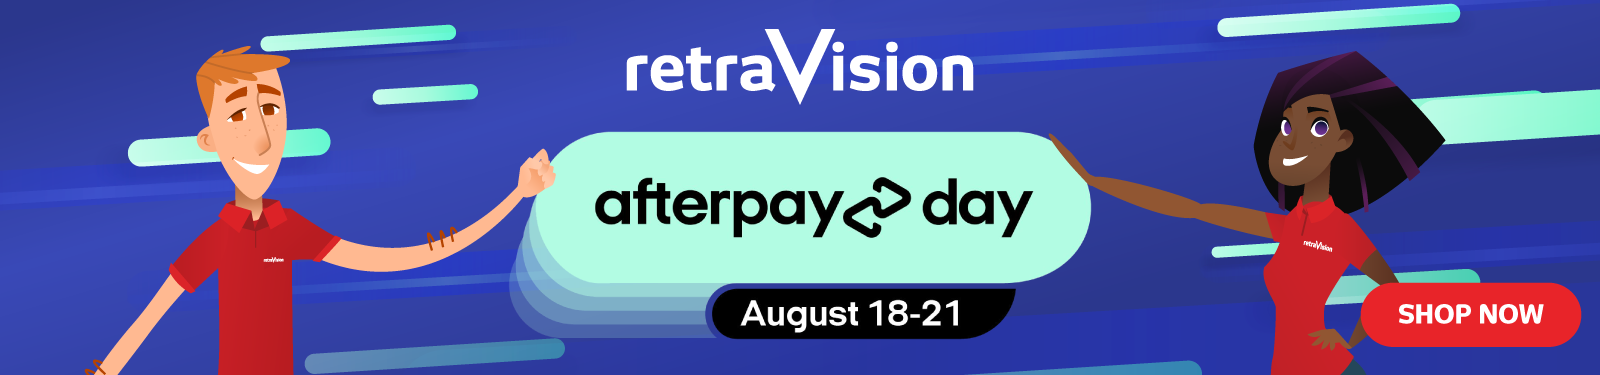 Afterpay Day Sale! at Retravision